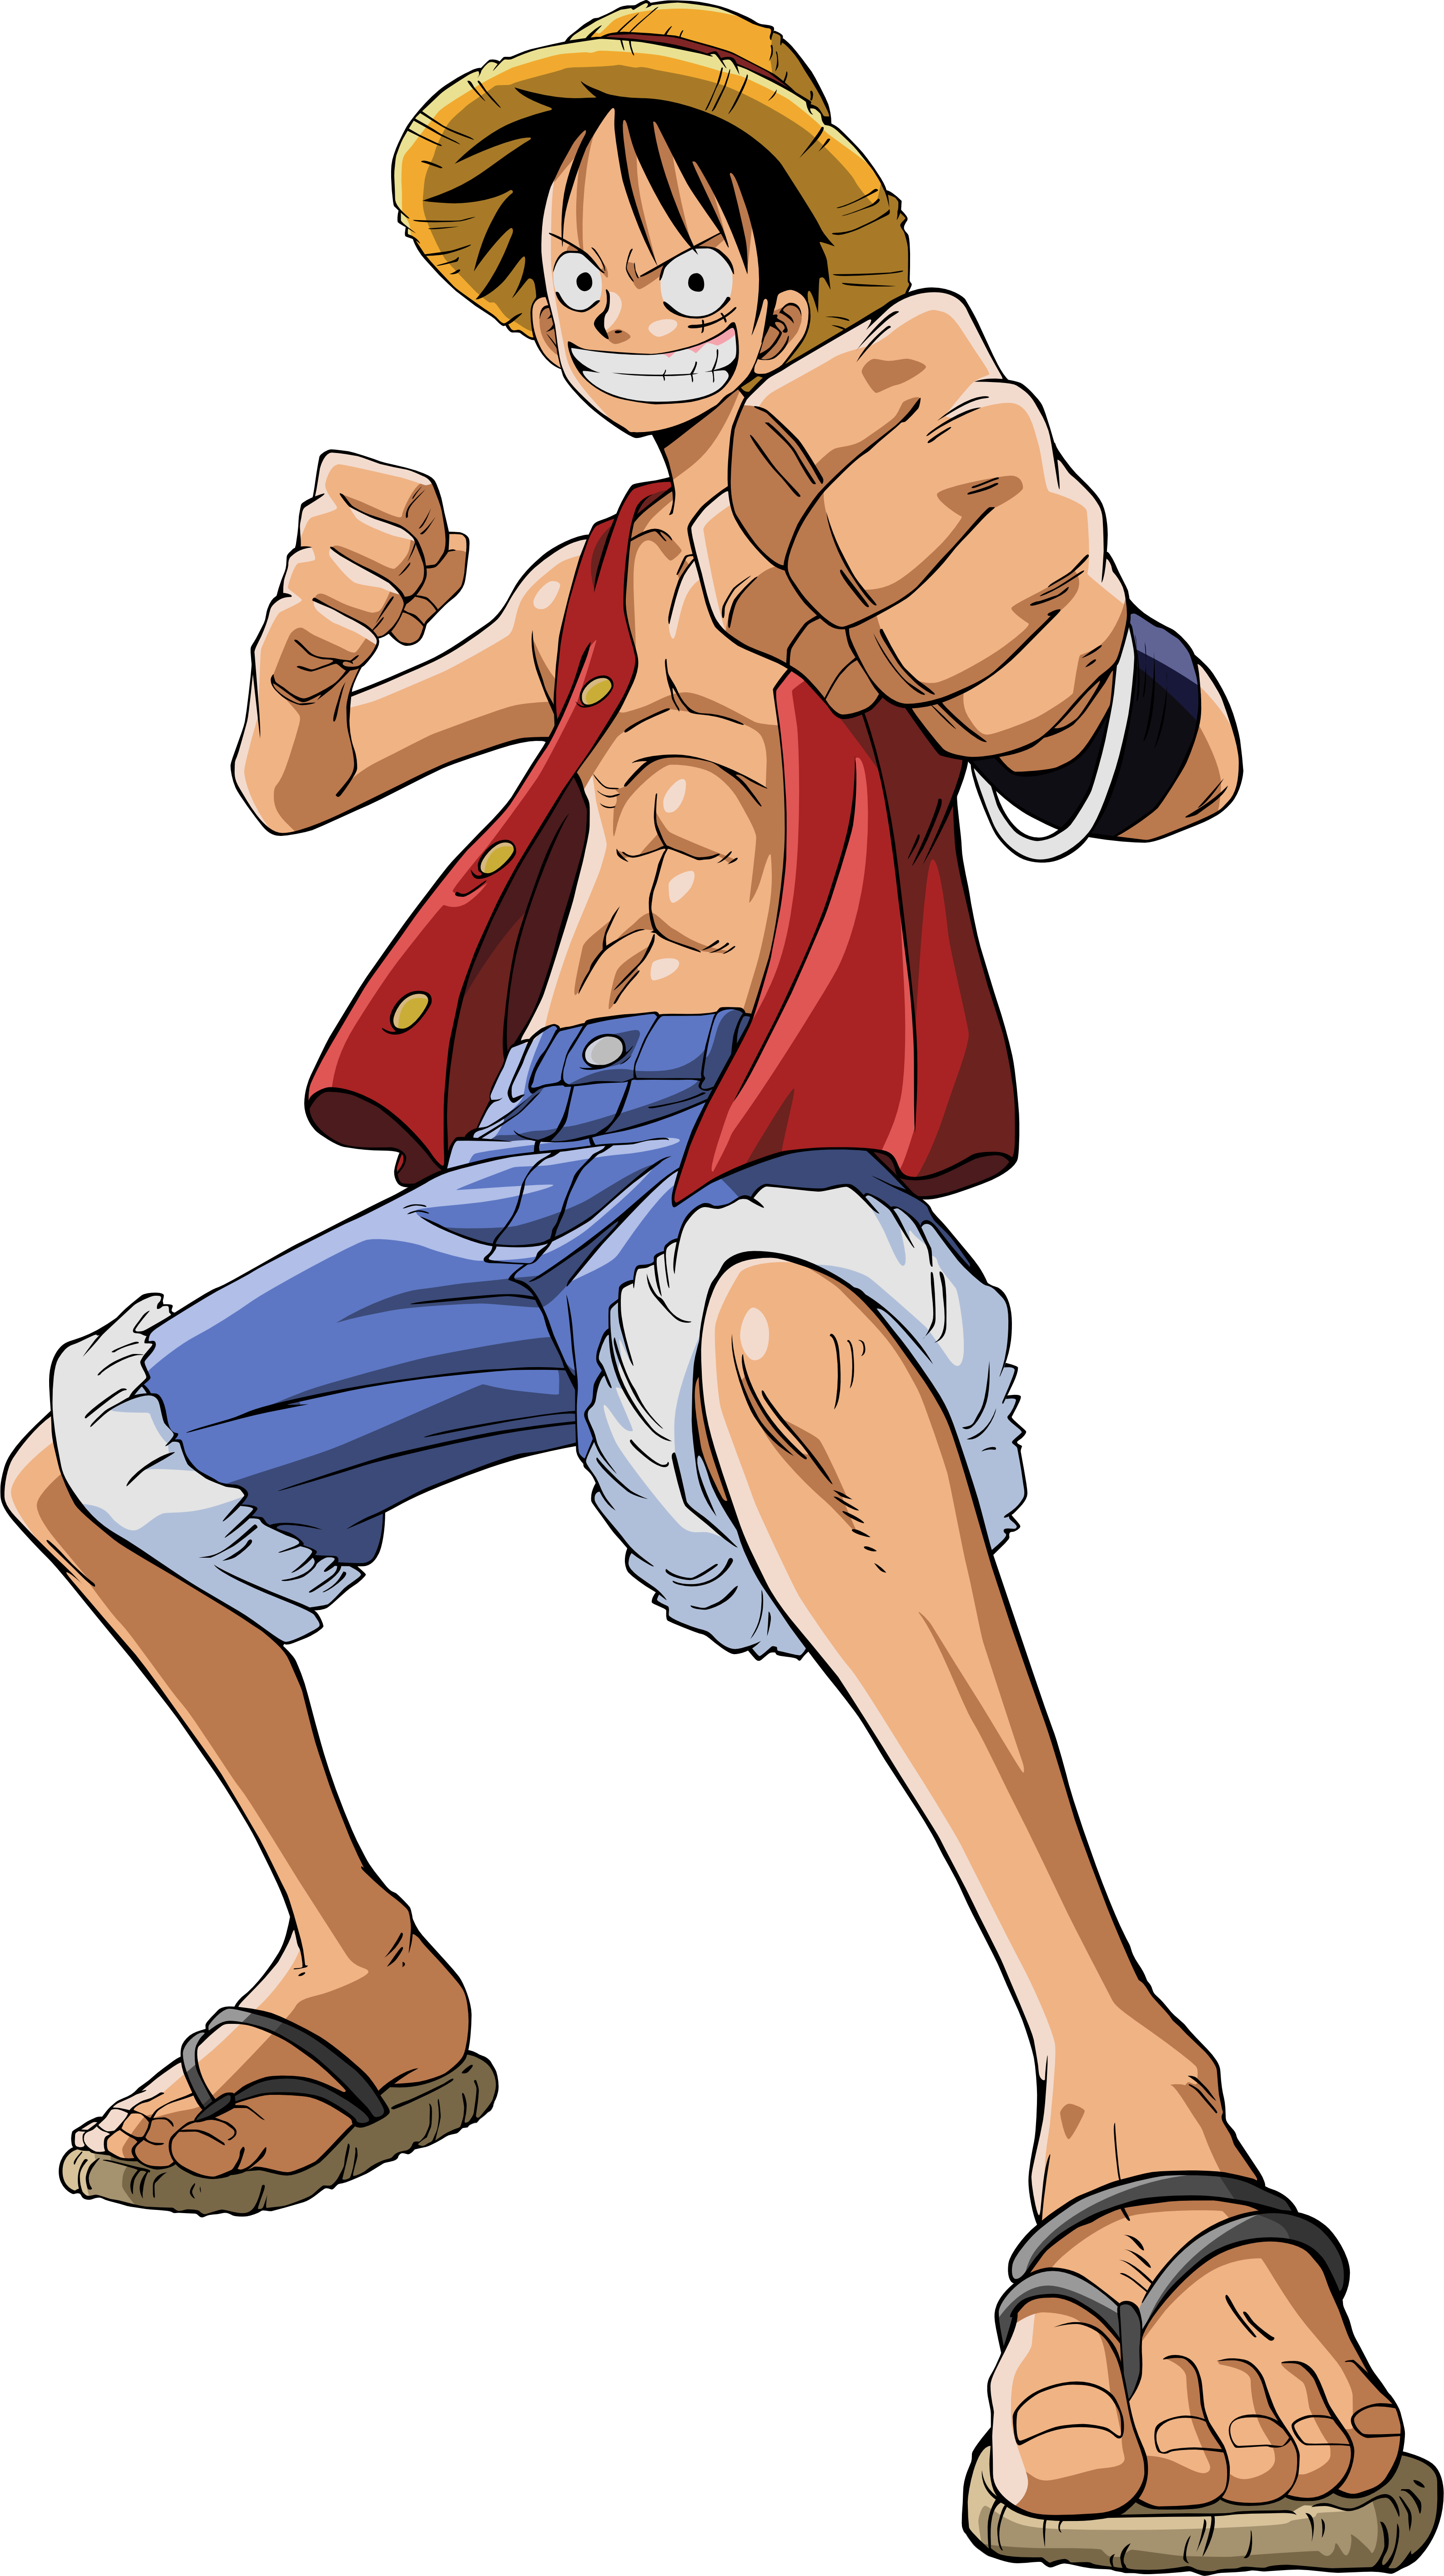 Download One Piece Luffy Transparent Background Hq Png Image Freepngimg